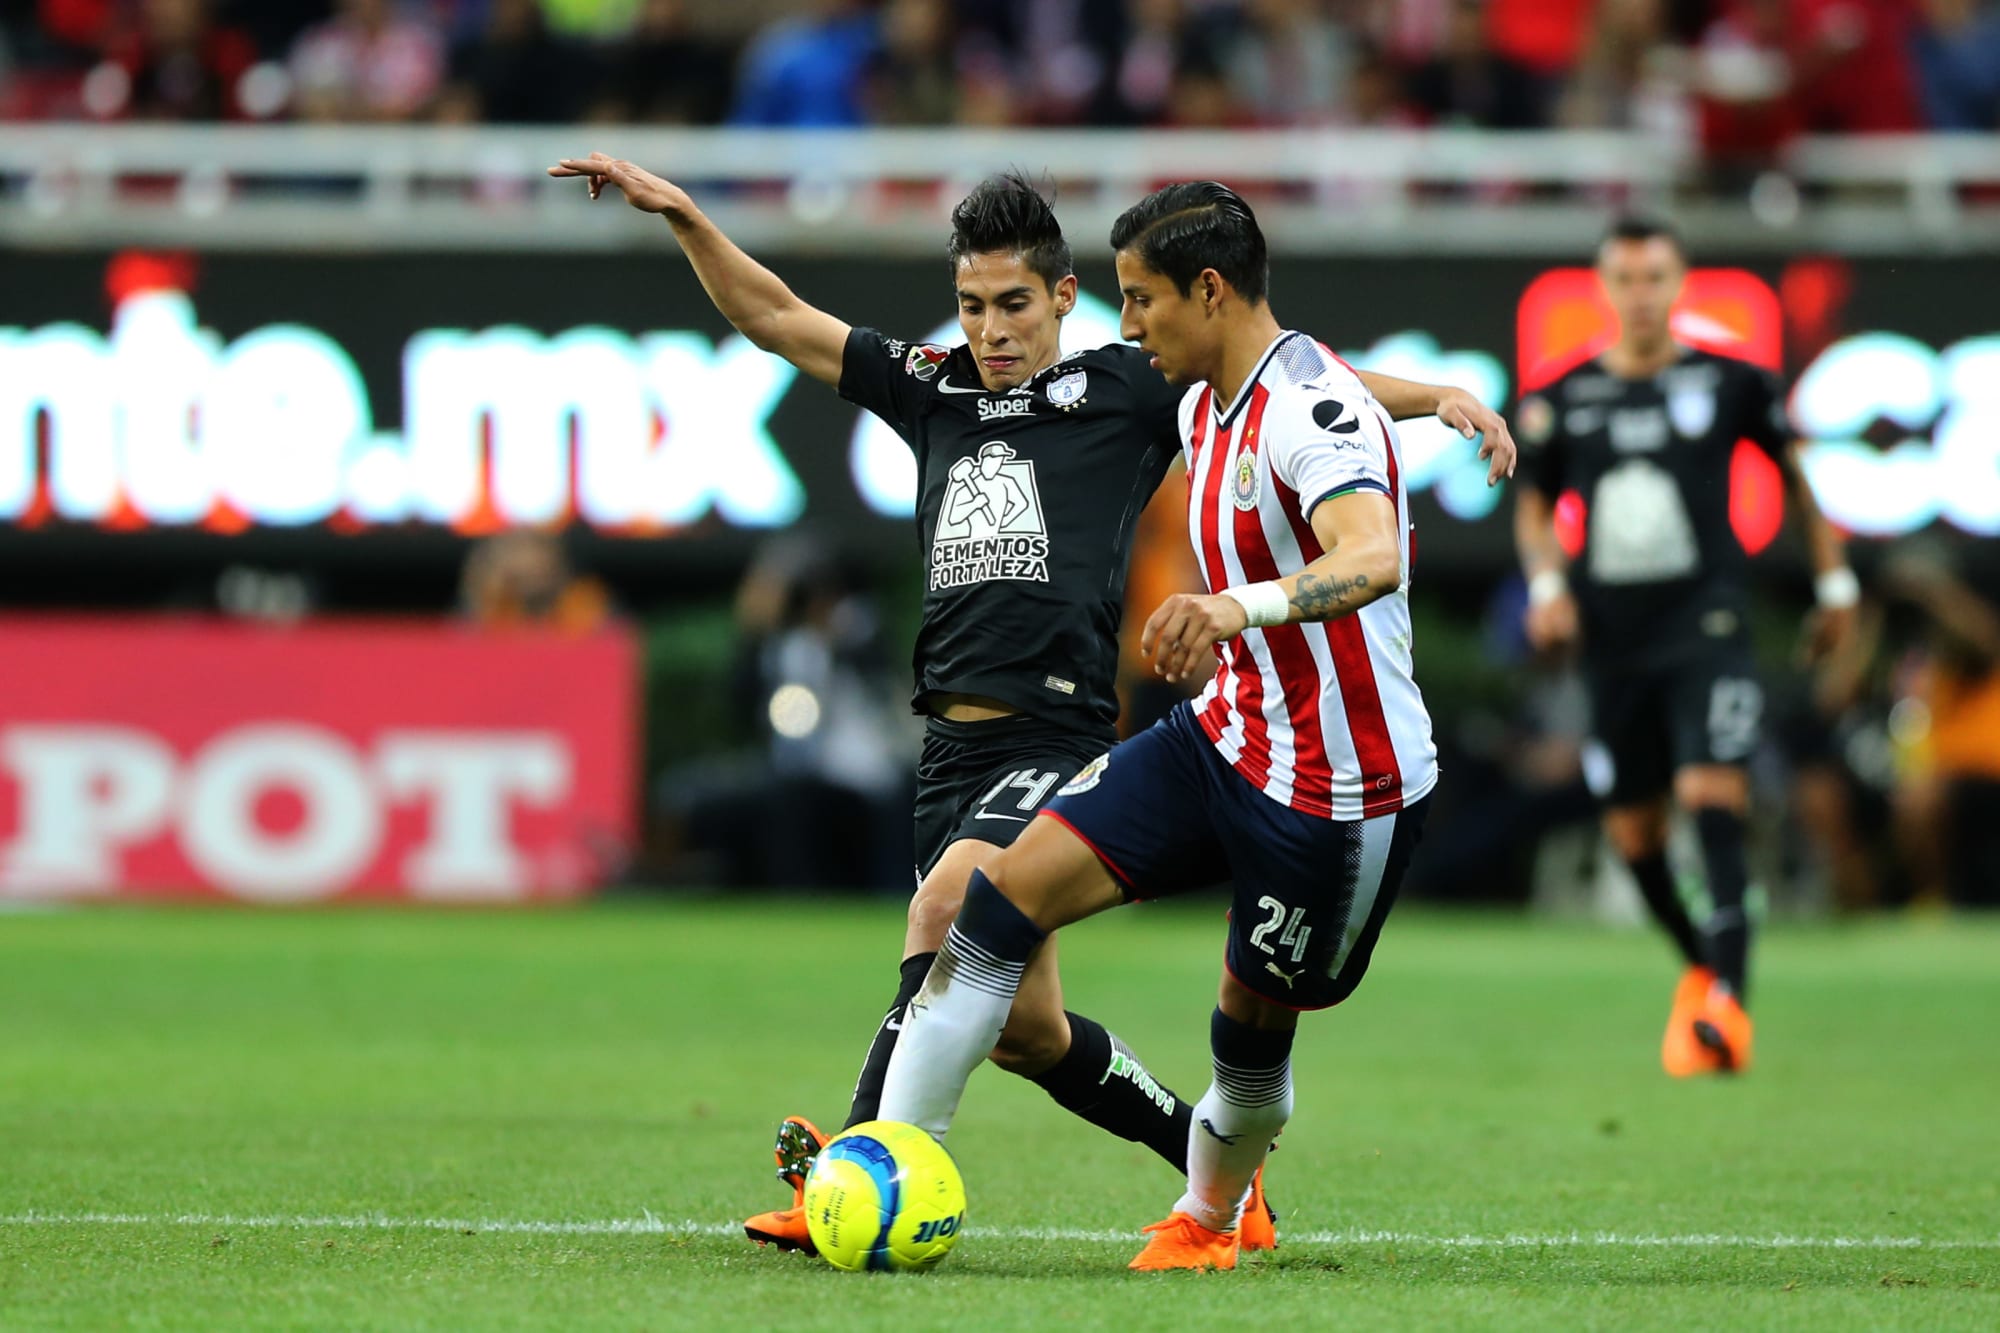 How would these two new faces impact the Chivas next season?